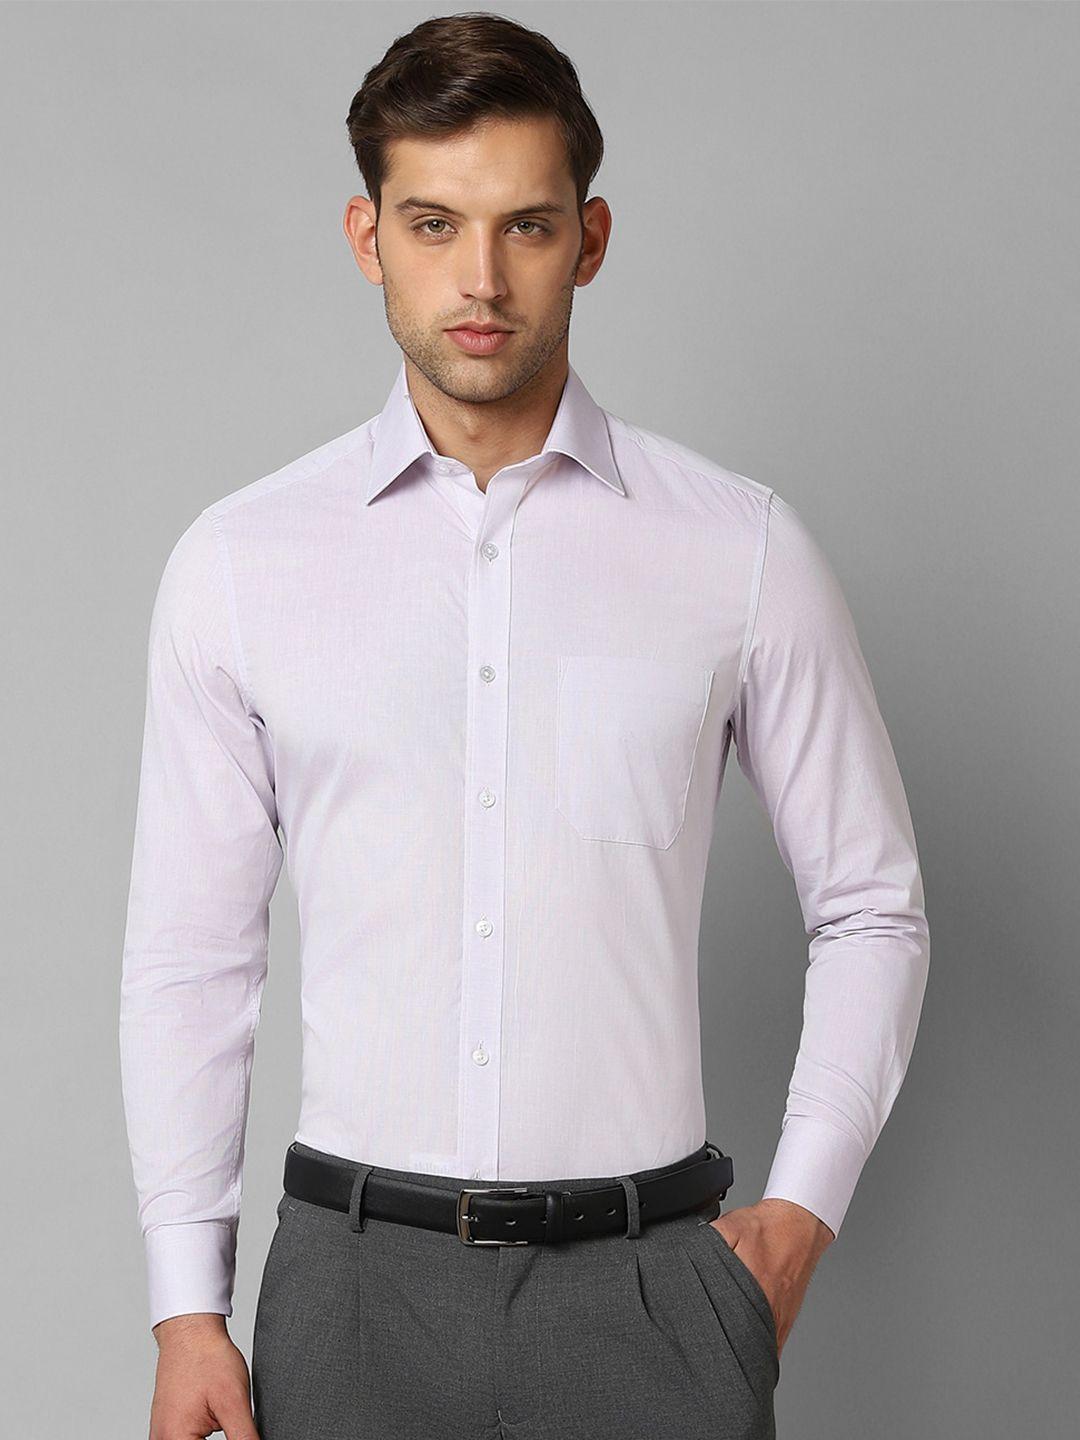 louis philippe opaque pure cotton formal shirt